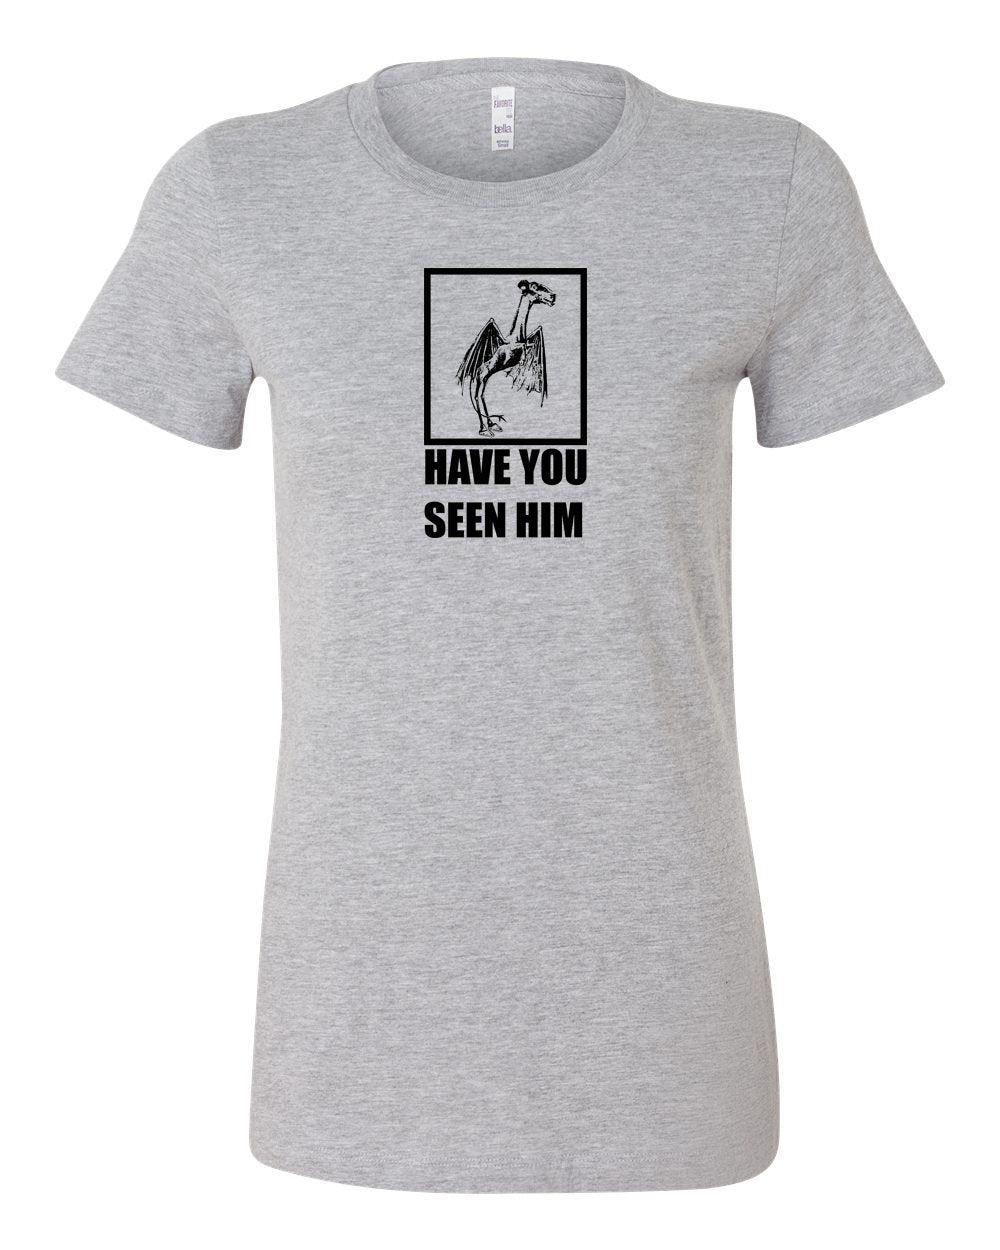 Have You Seen Him? LADIES Junior-Fit T-Shirt